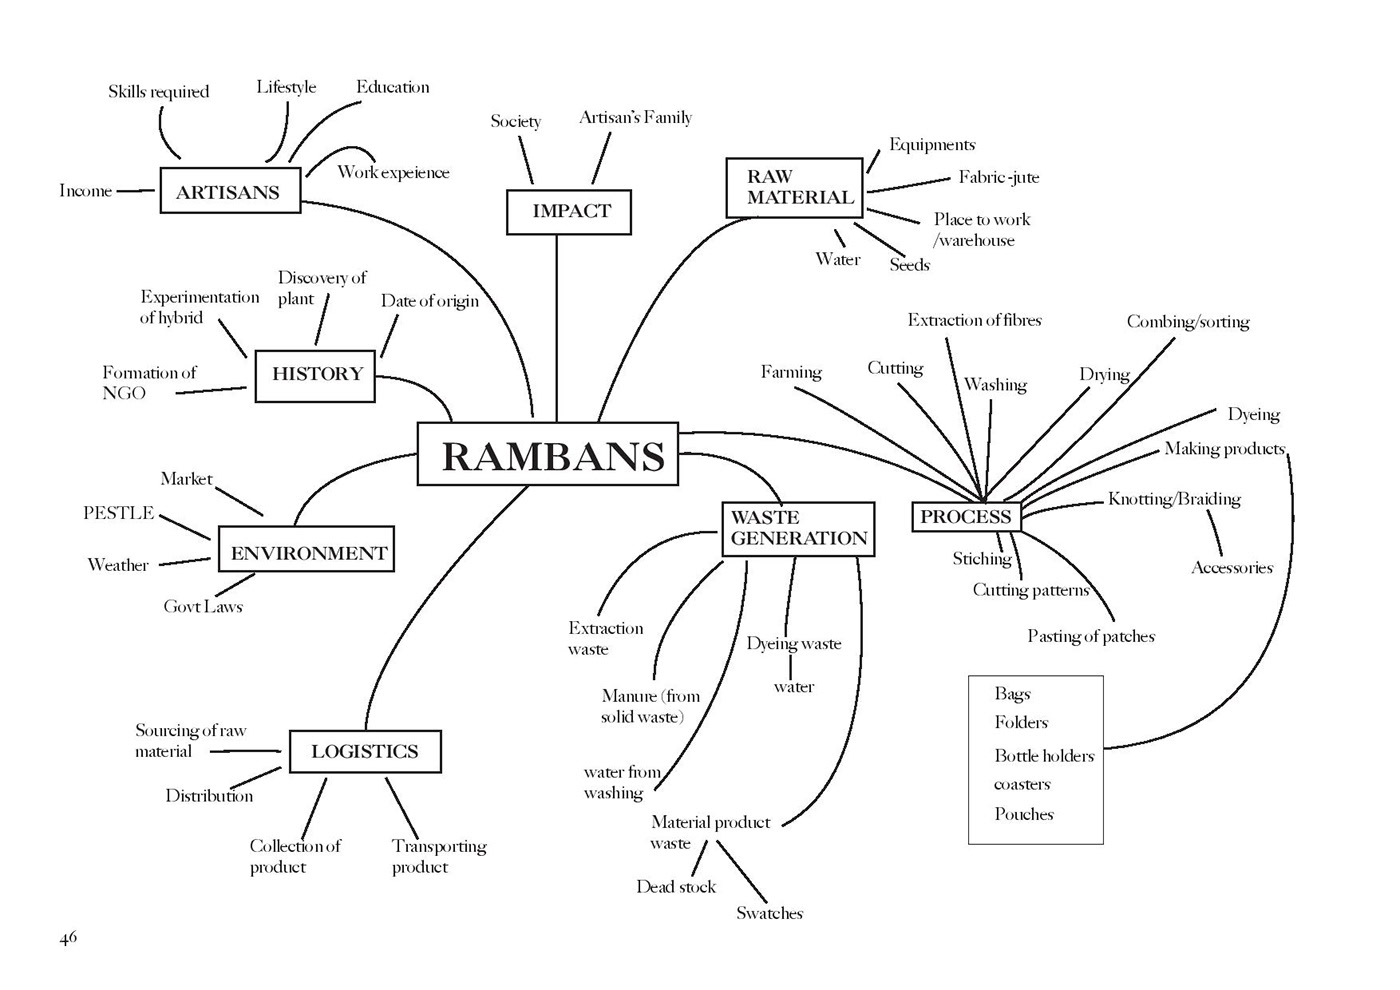 Sustainability craft rambans Craft study ethnographic research research